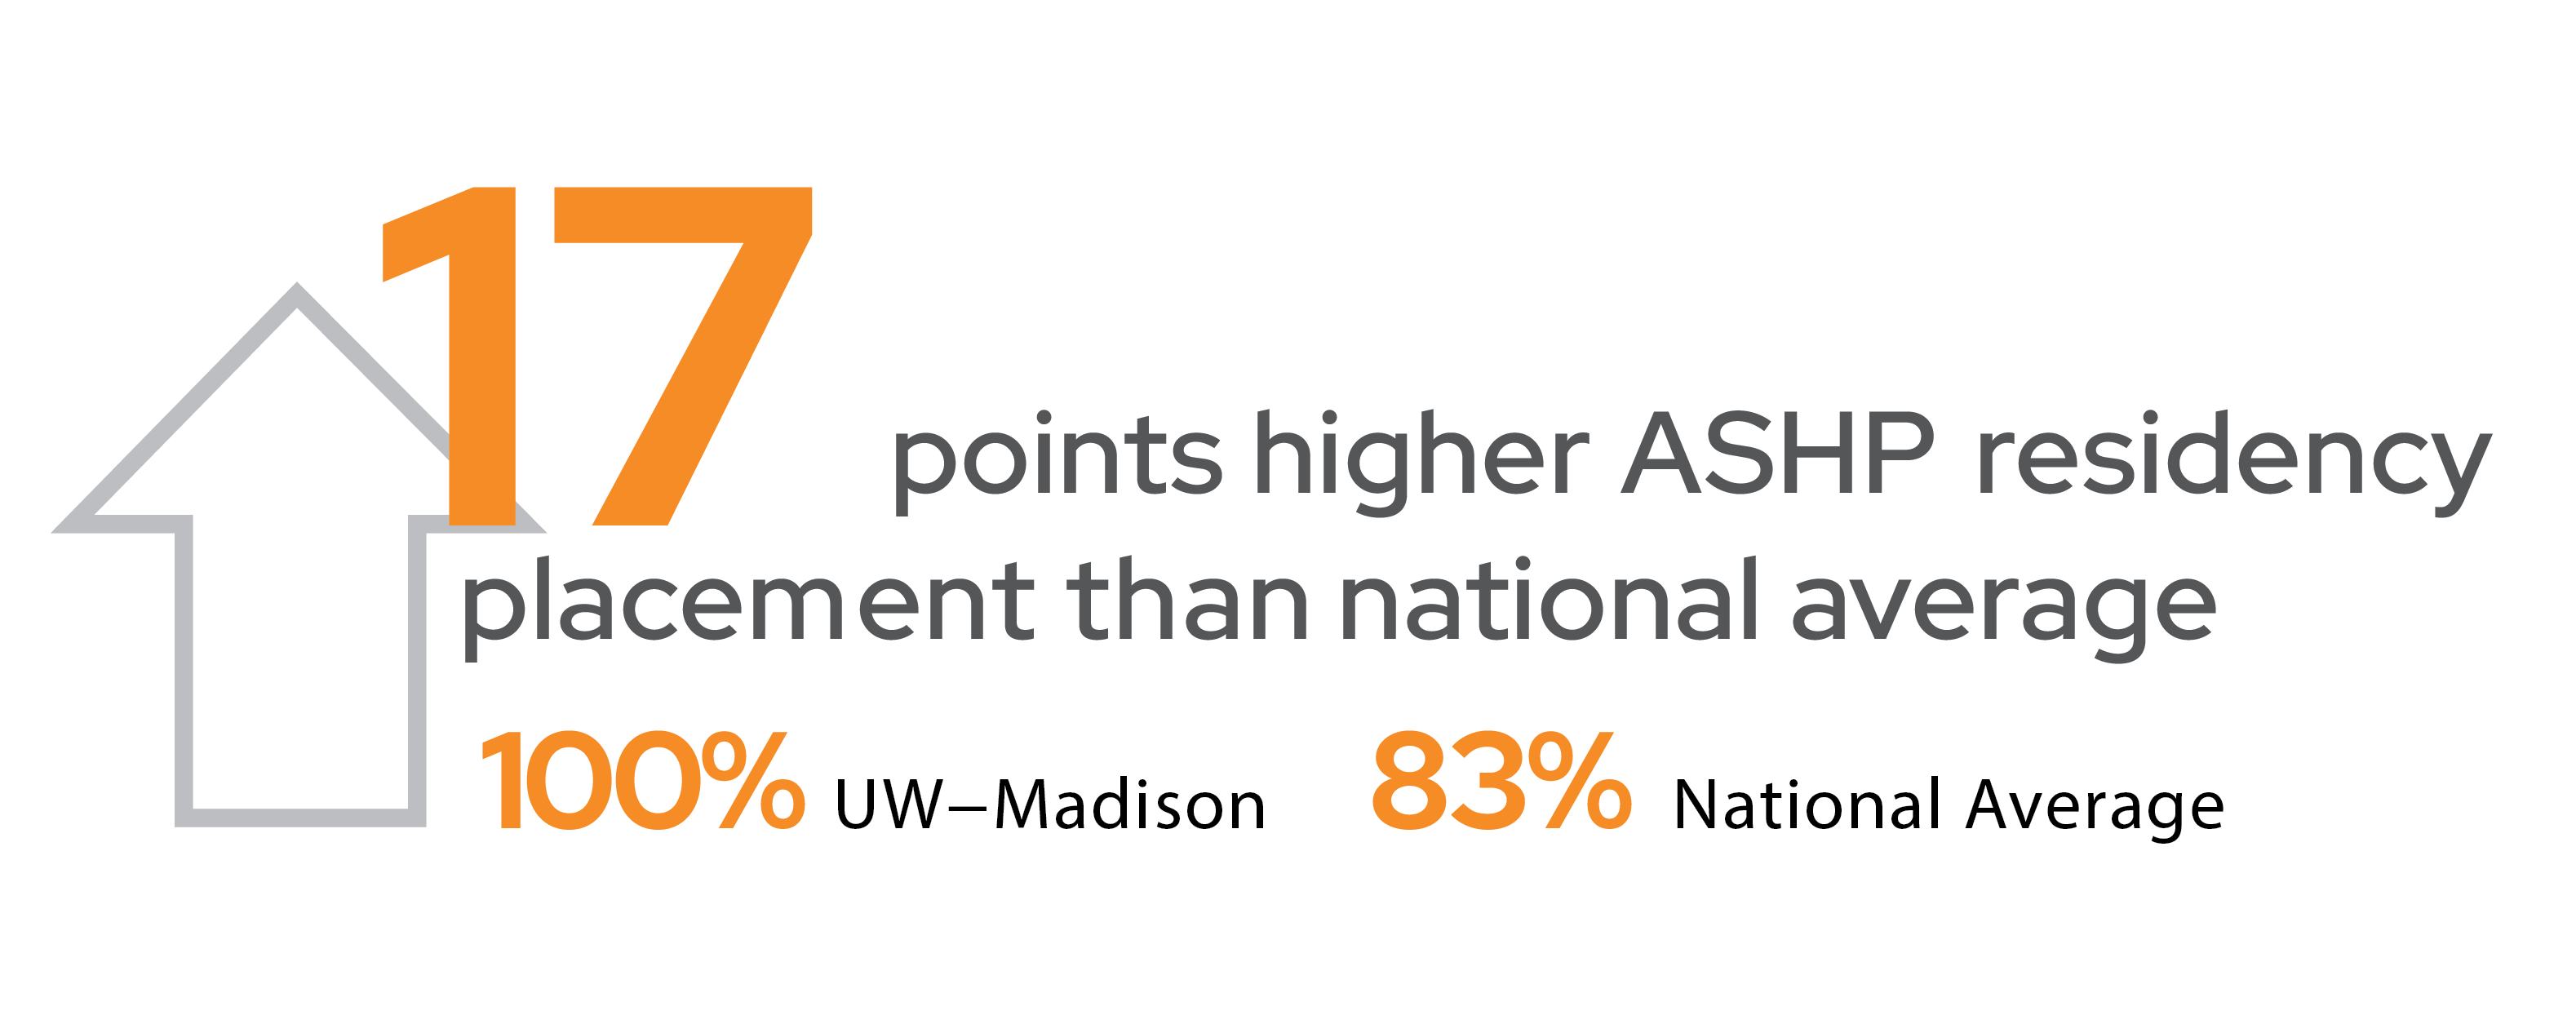 17 points higher ASHP residency placement than the national average (100% UW-Madison vs. 83% National Average)